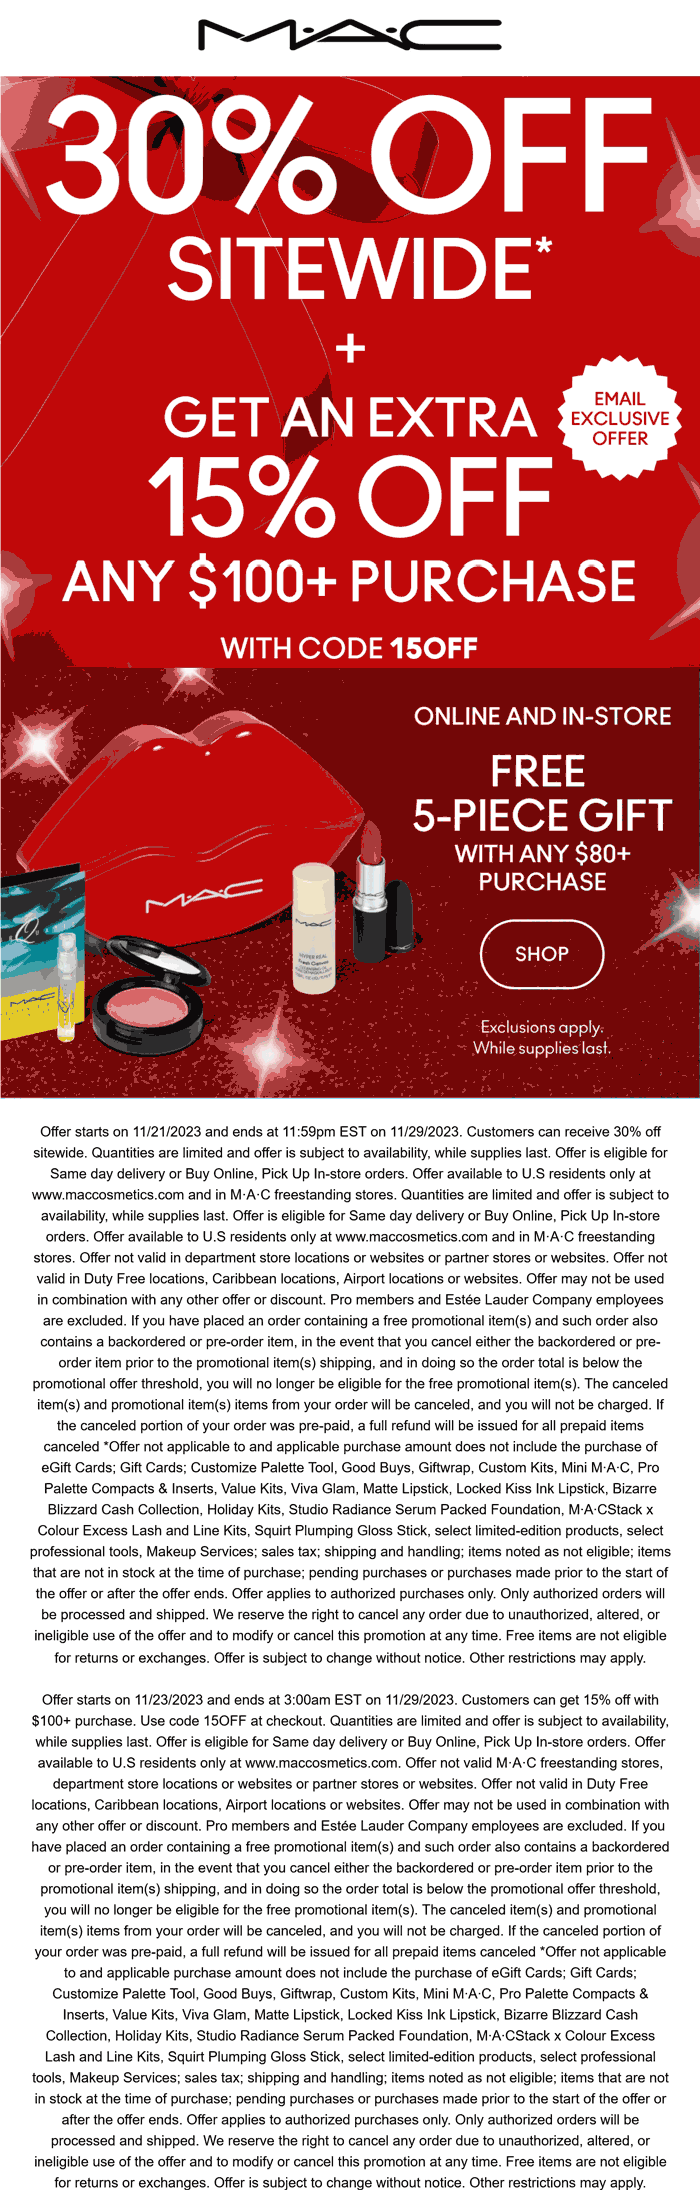 30% off everything + free 5pc kit on $80 at MAC cosmetics, another 15% online via promo 15OFF #mac